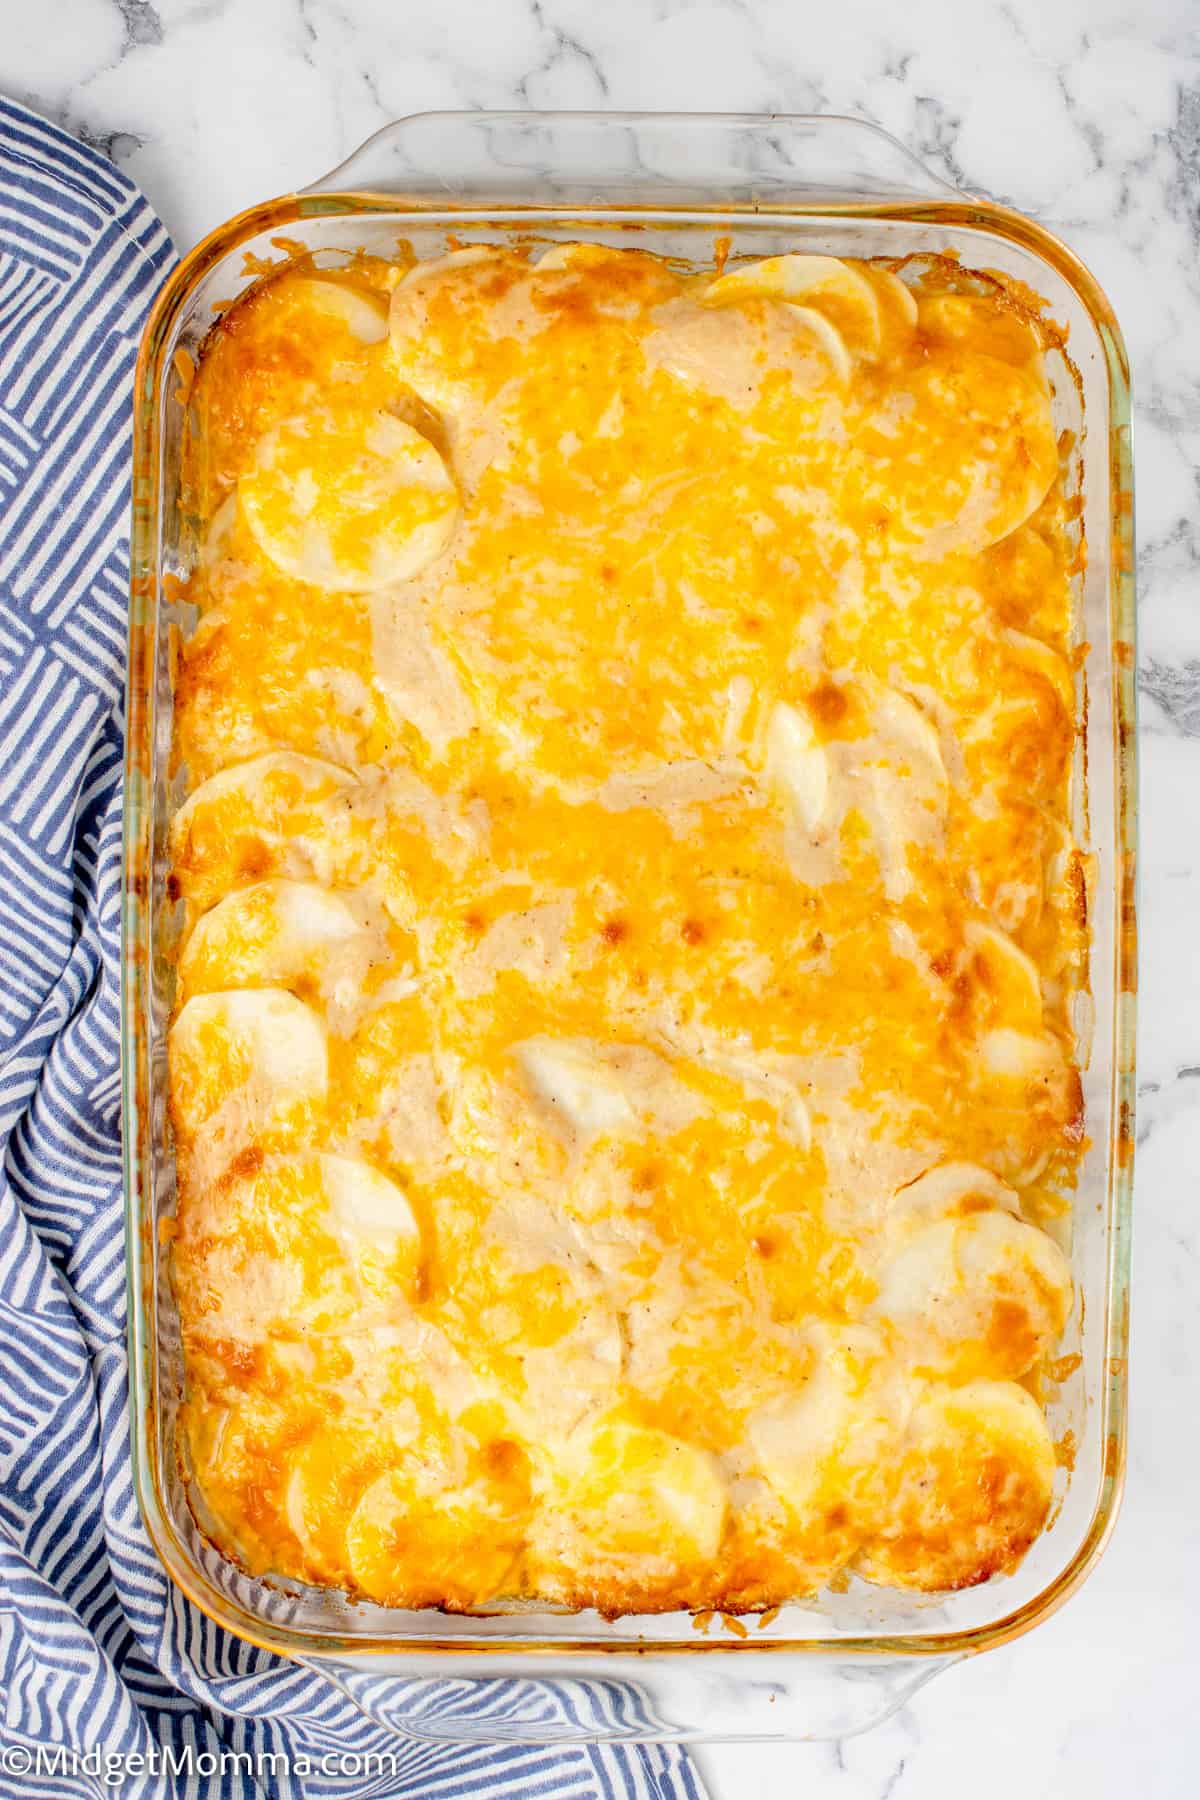 baked Creamy Scalloped Potatoes with Cheese